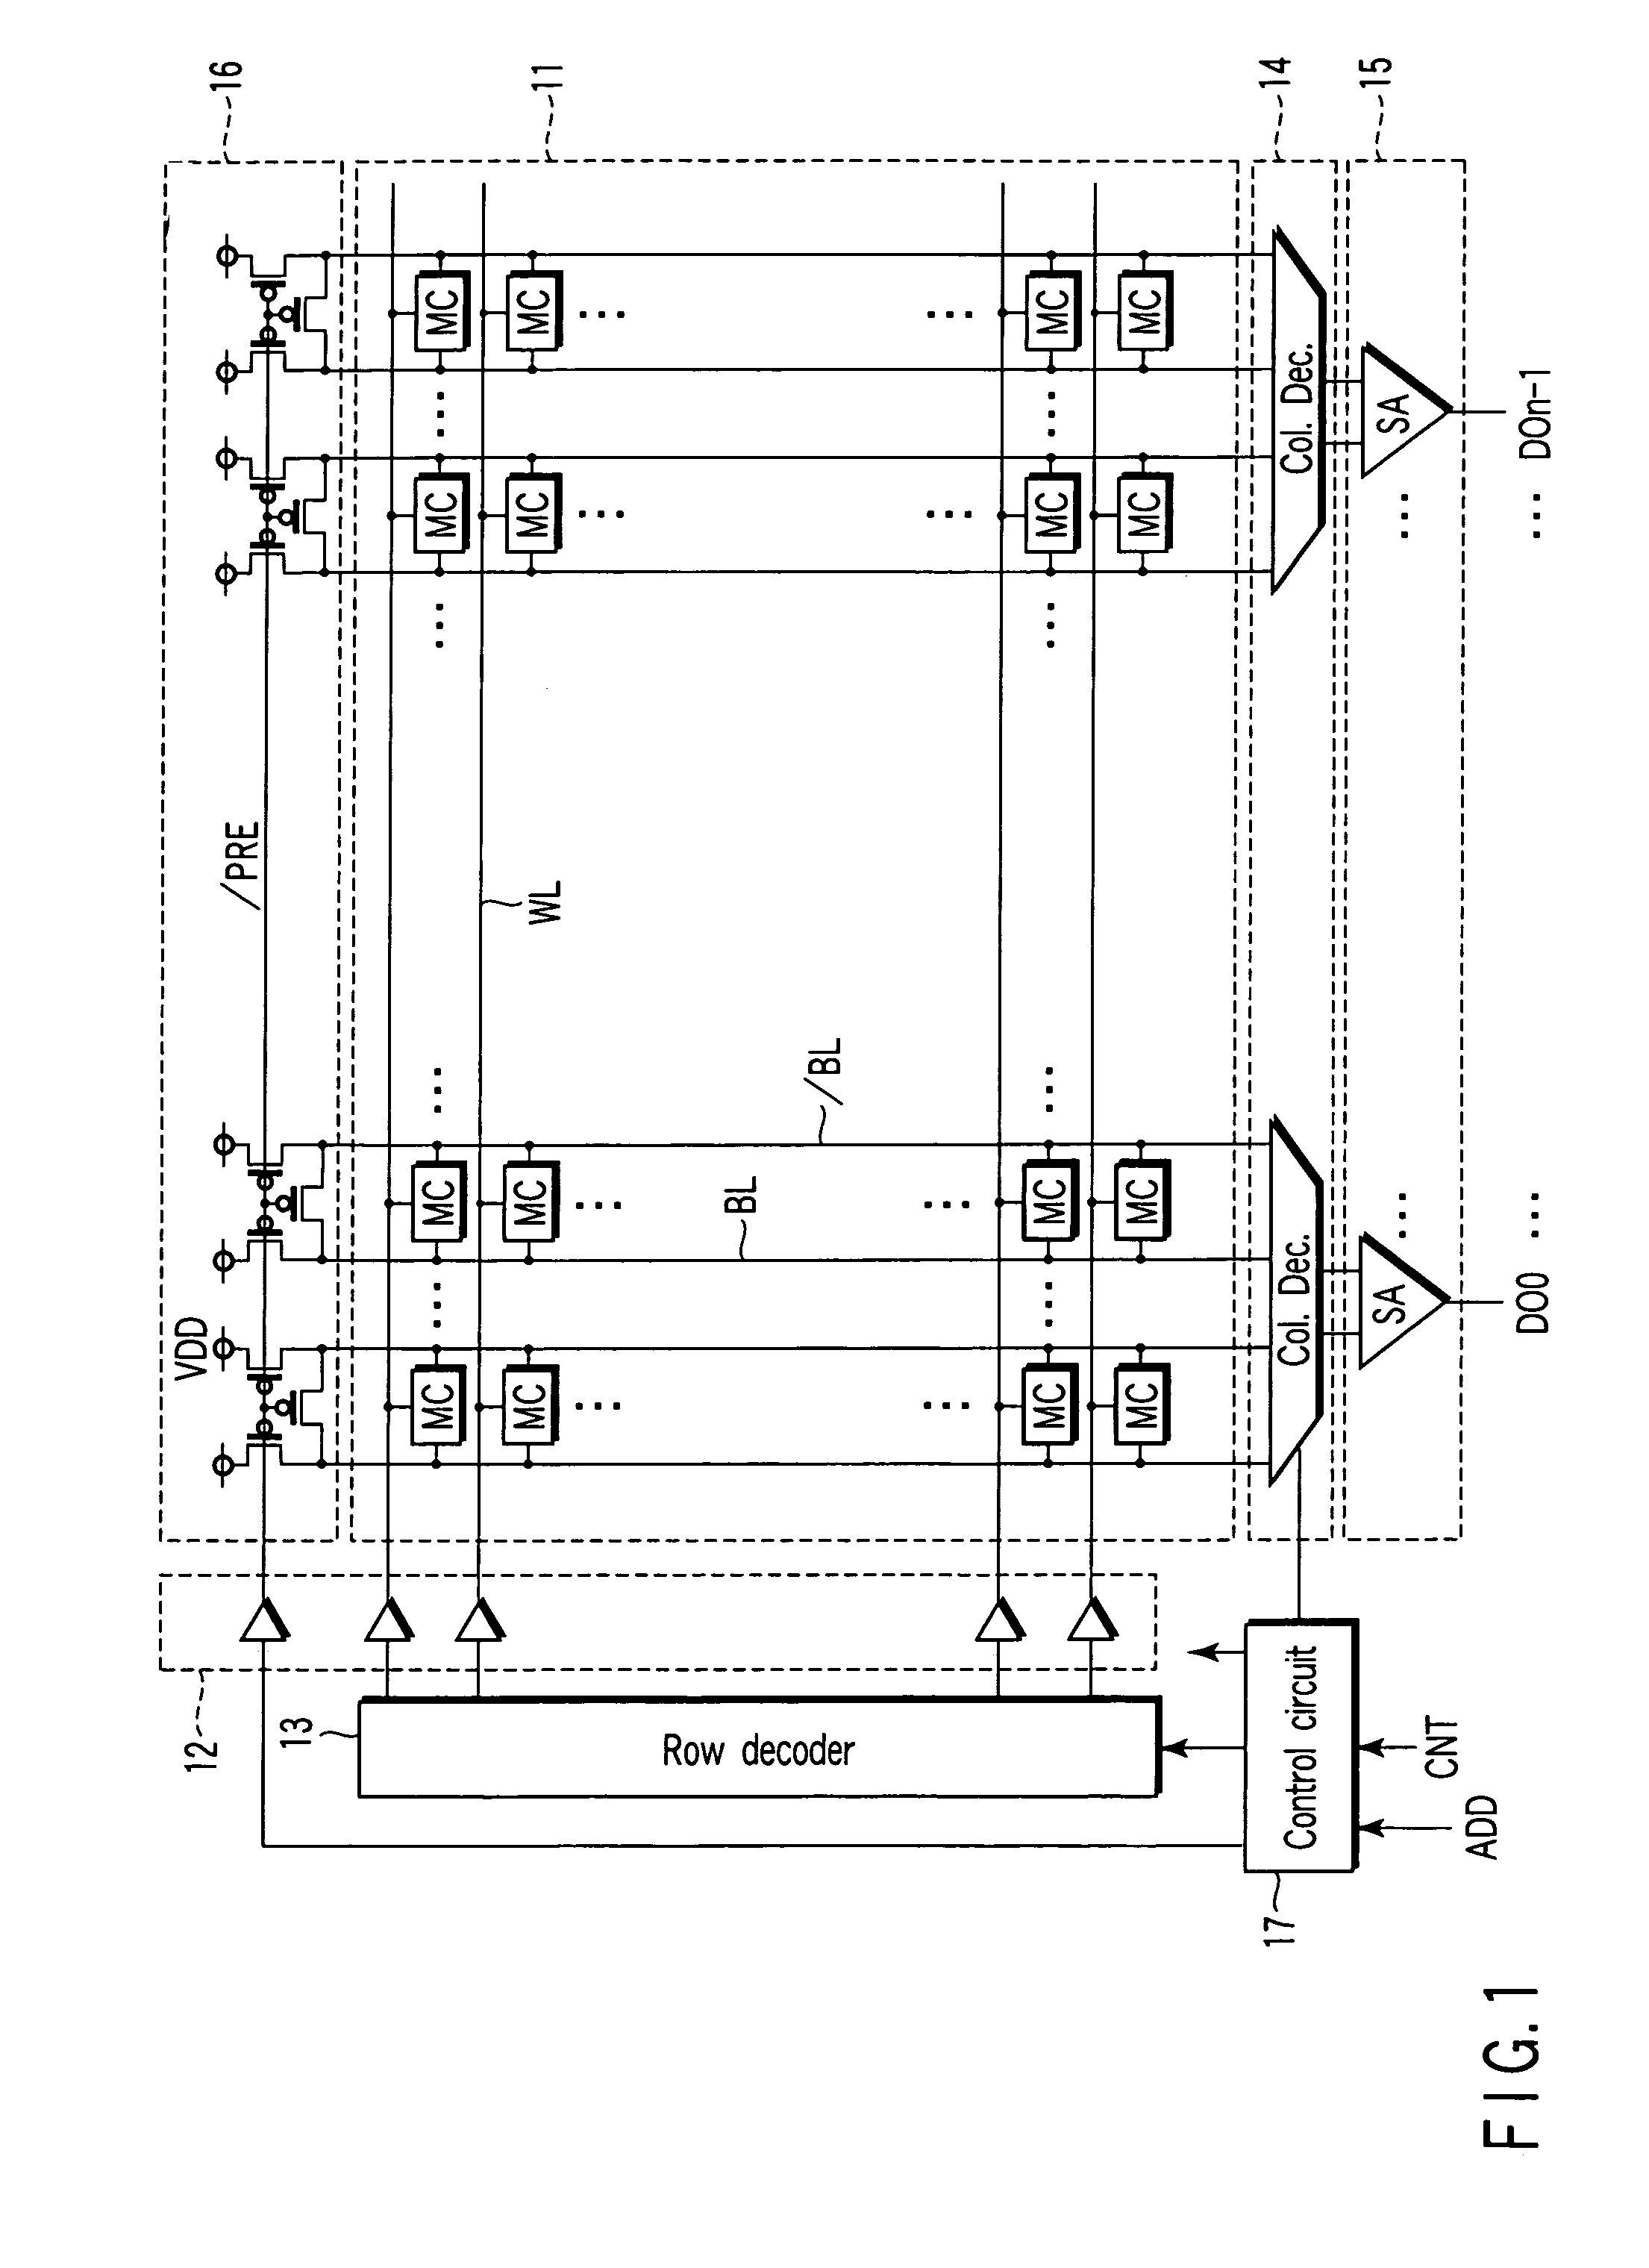 Static random access memory (SRAM) with clamped source potential in standby mode